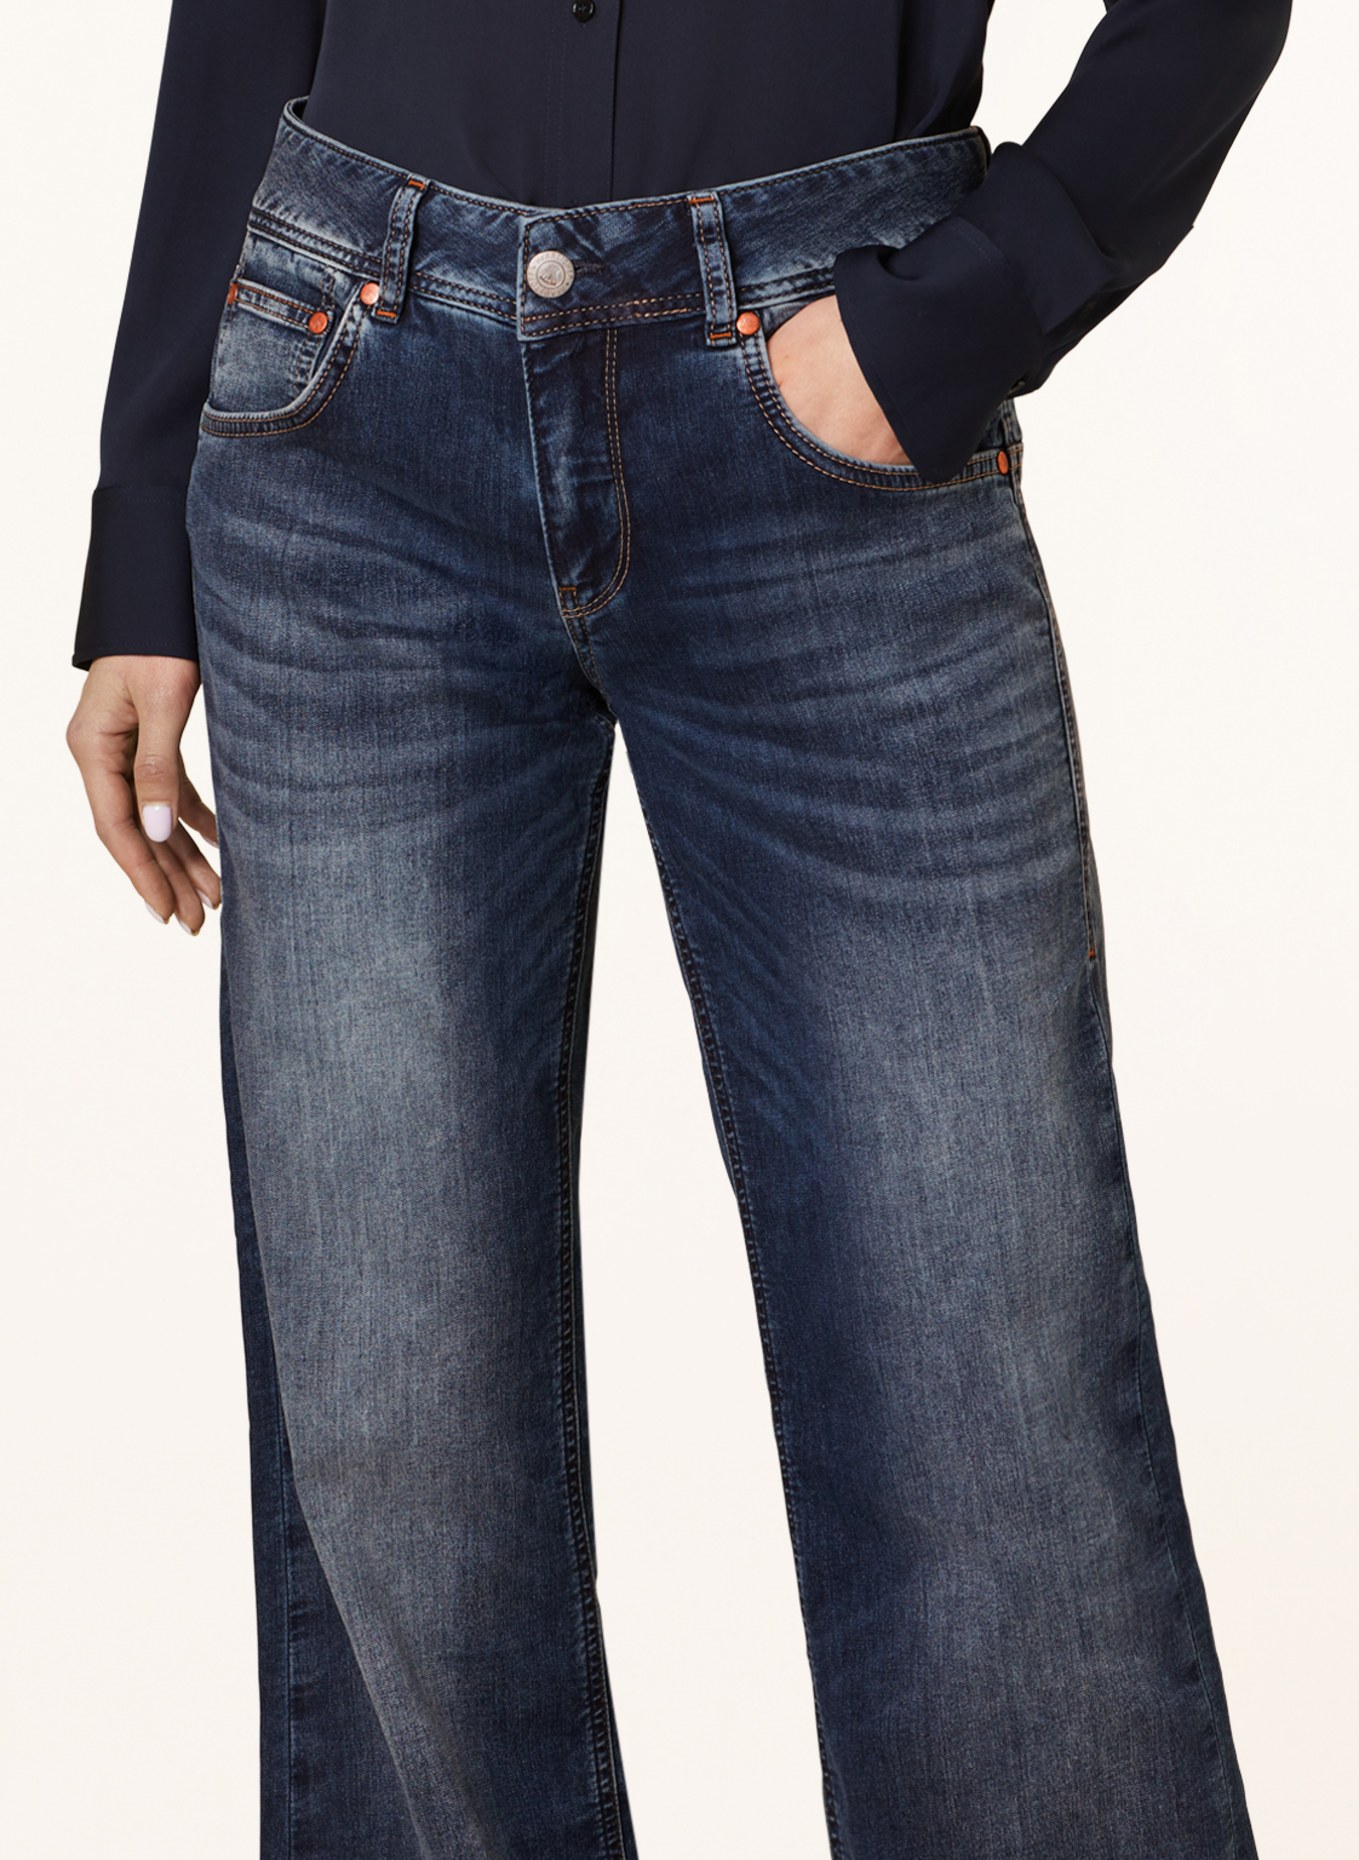 Herrlicher Flared jeans EDNA, Color: 771 releaxed (Image 5)